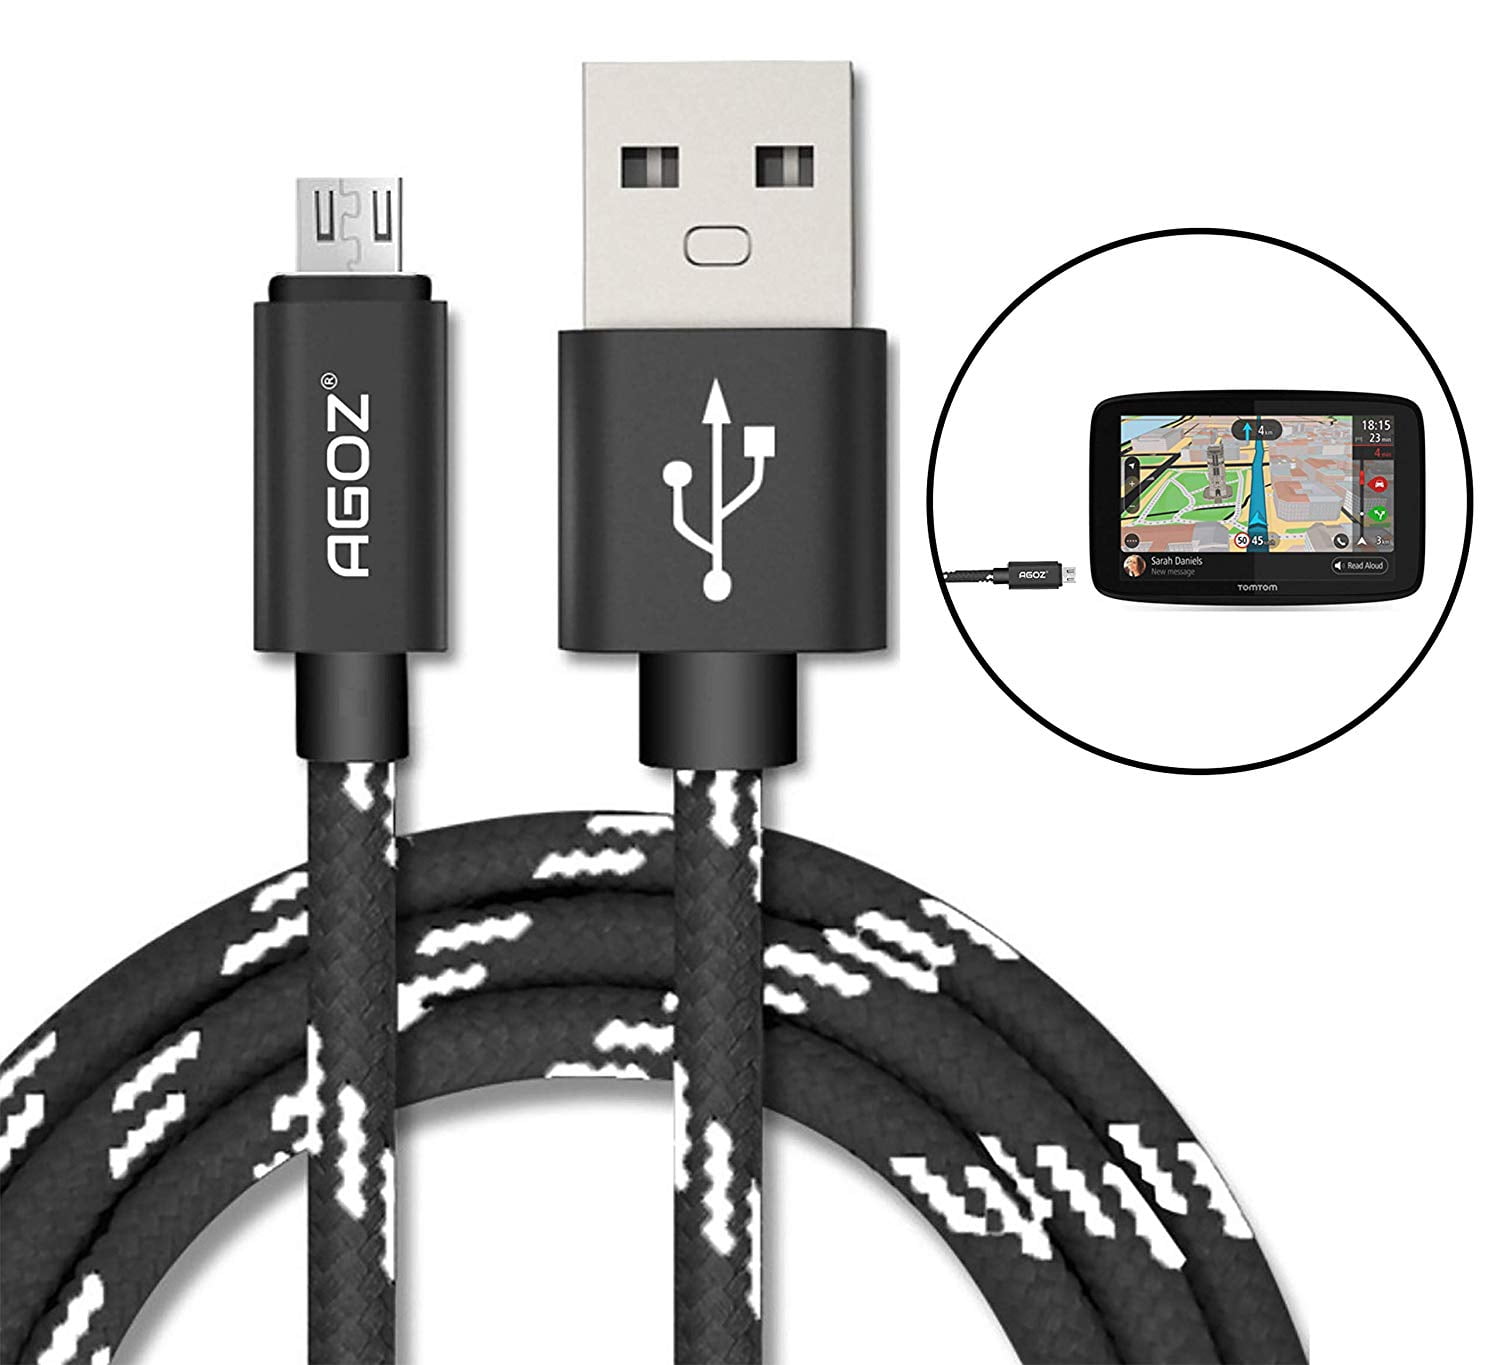 GO 50 SAT NAV REPLACEMENT USB CHARGER CABLE GO 610 GO 40 TOMTOM GO 600 